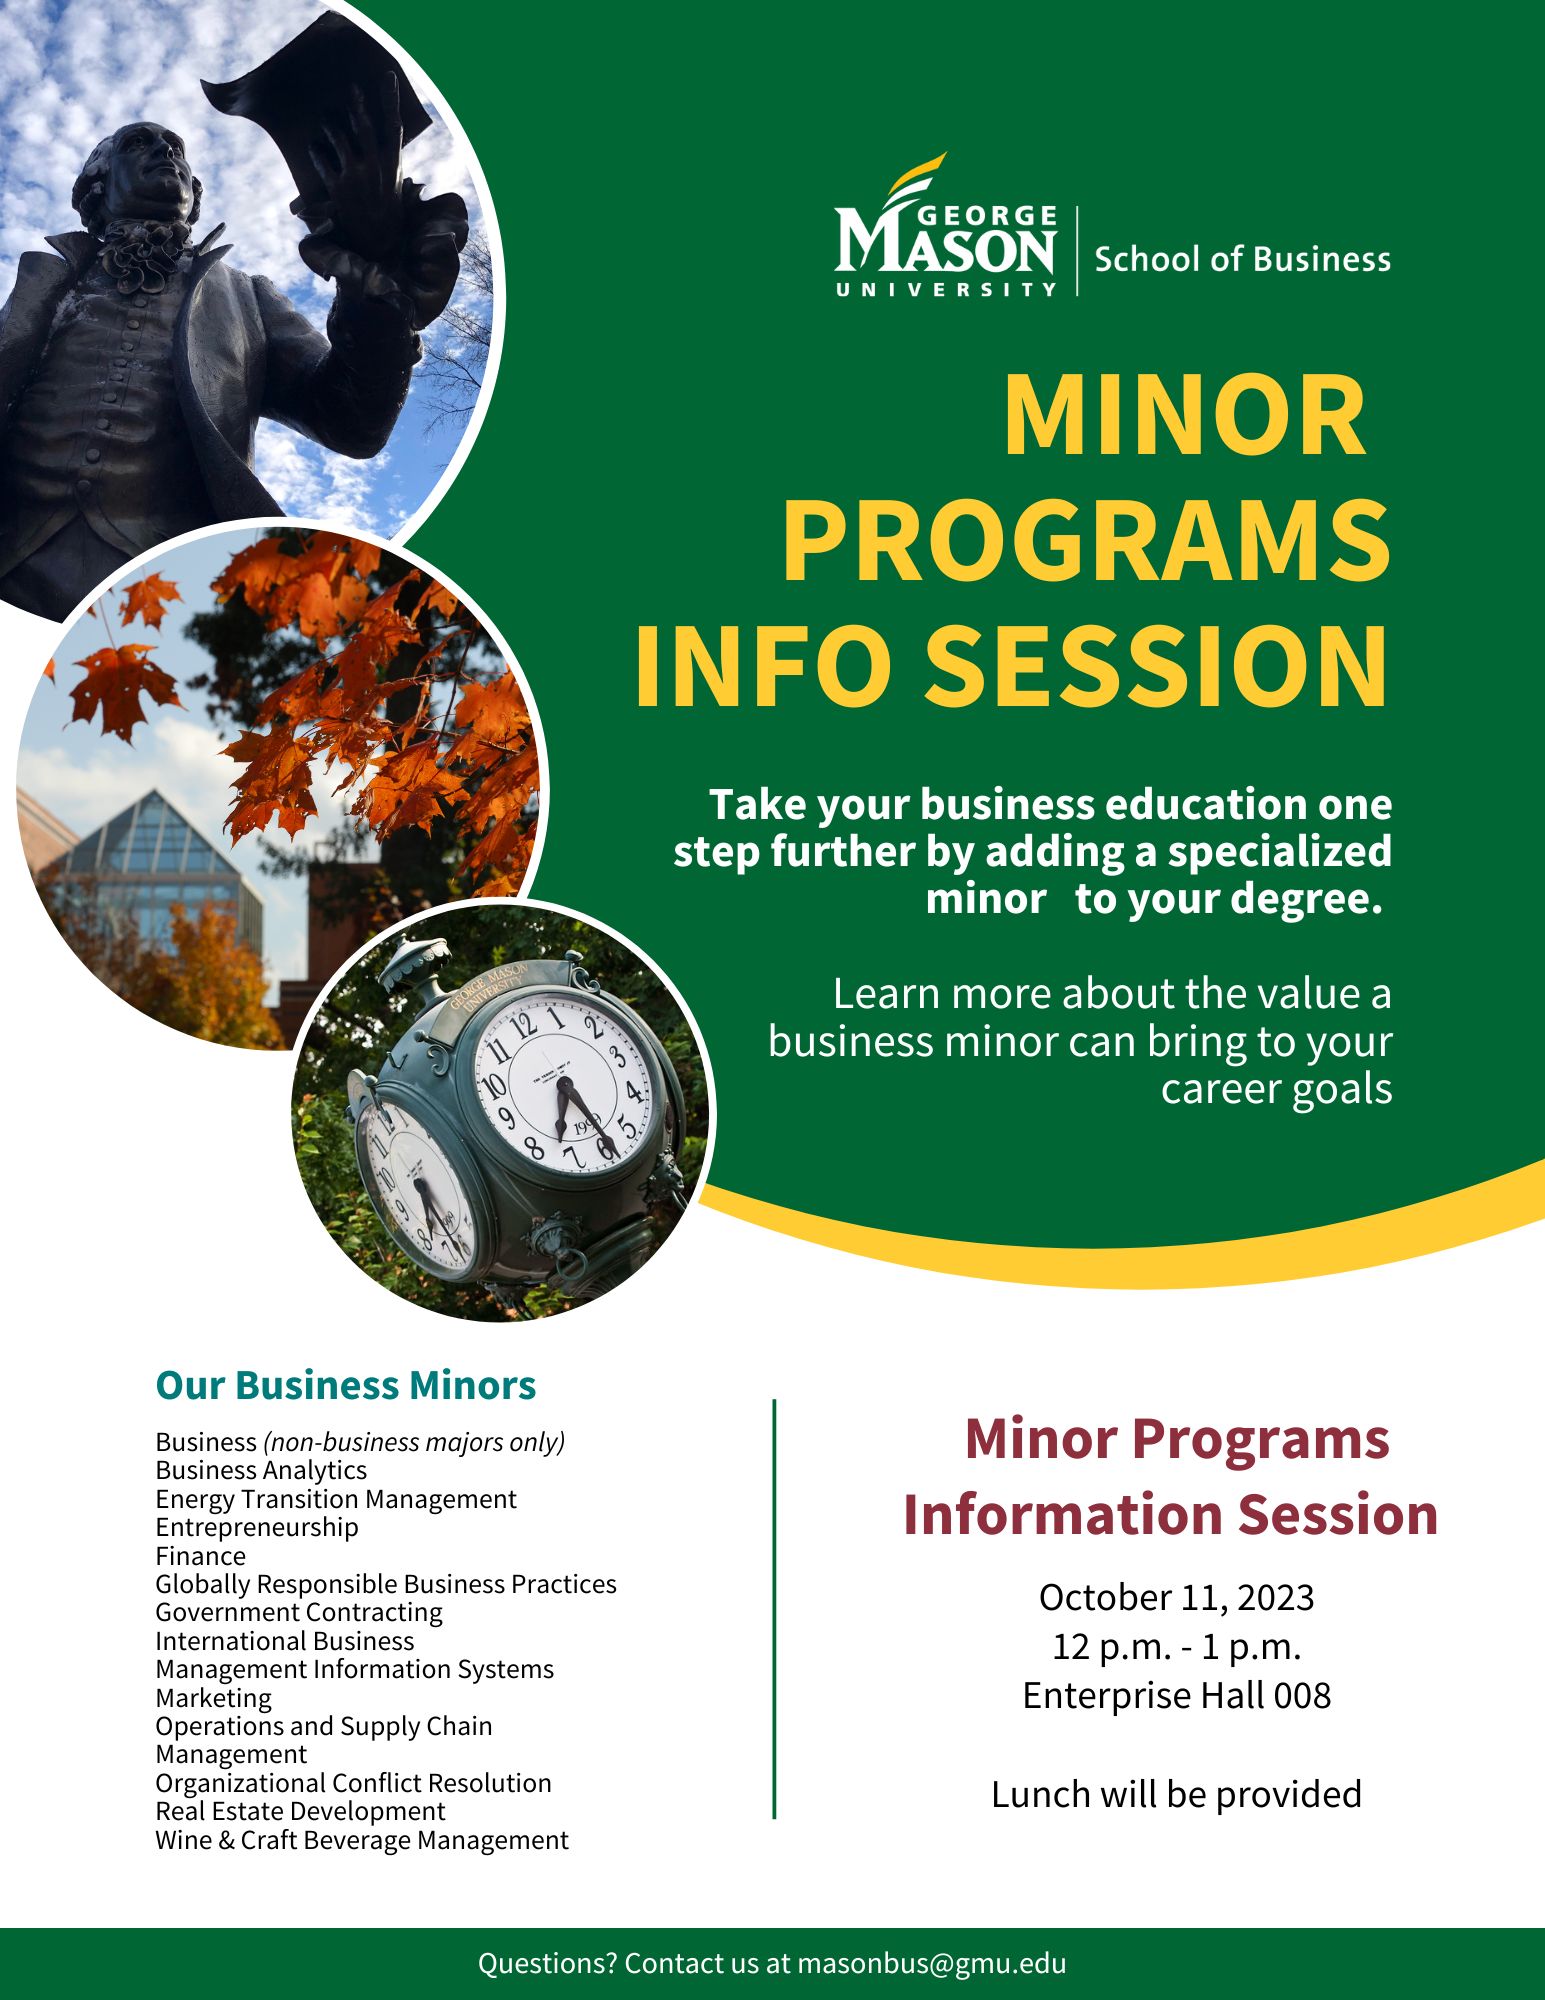 Minors Info session, October 11 12-1pm in ENT 017 RSVP required